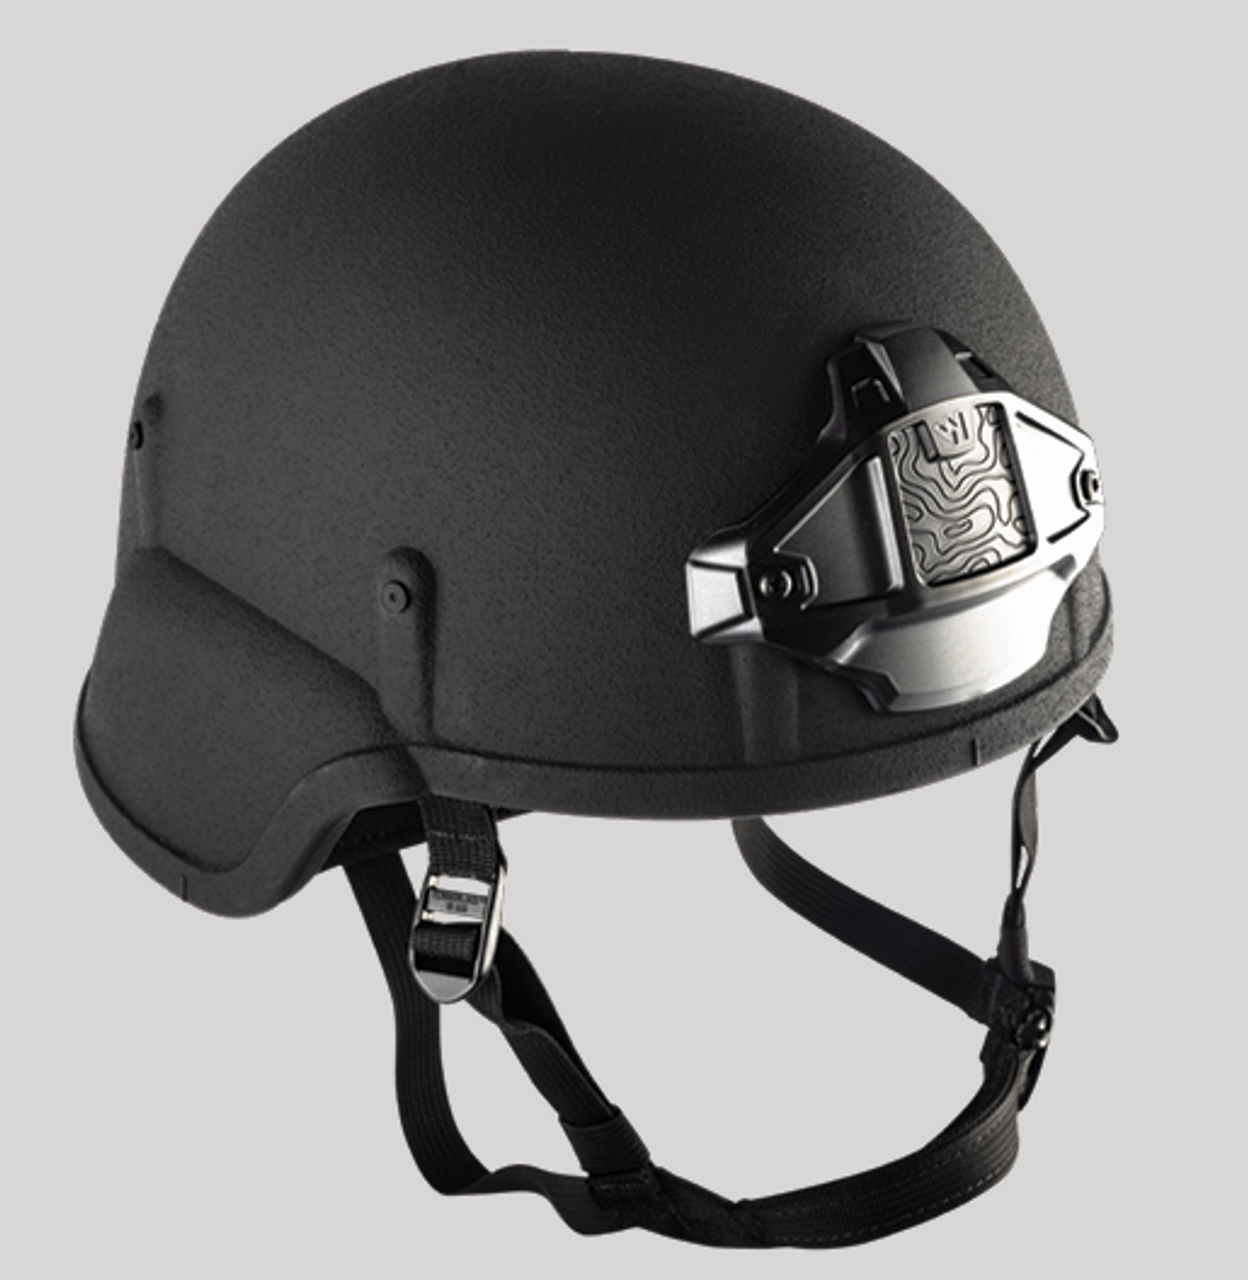 Avon Protection - EPIC Responder Ballistic Helmet - Includes H-Back Retention System, 8-Pad Liner System & Front Cover Plate